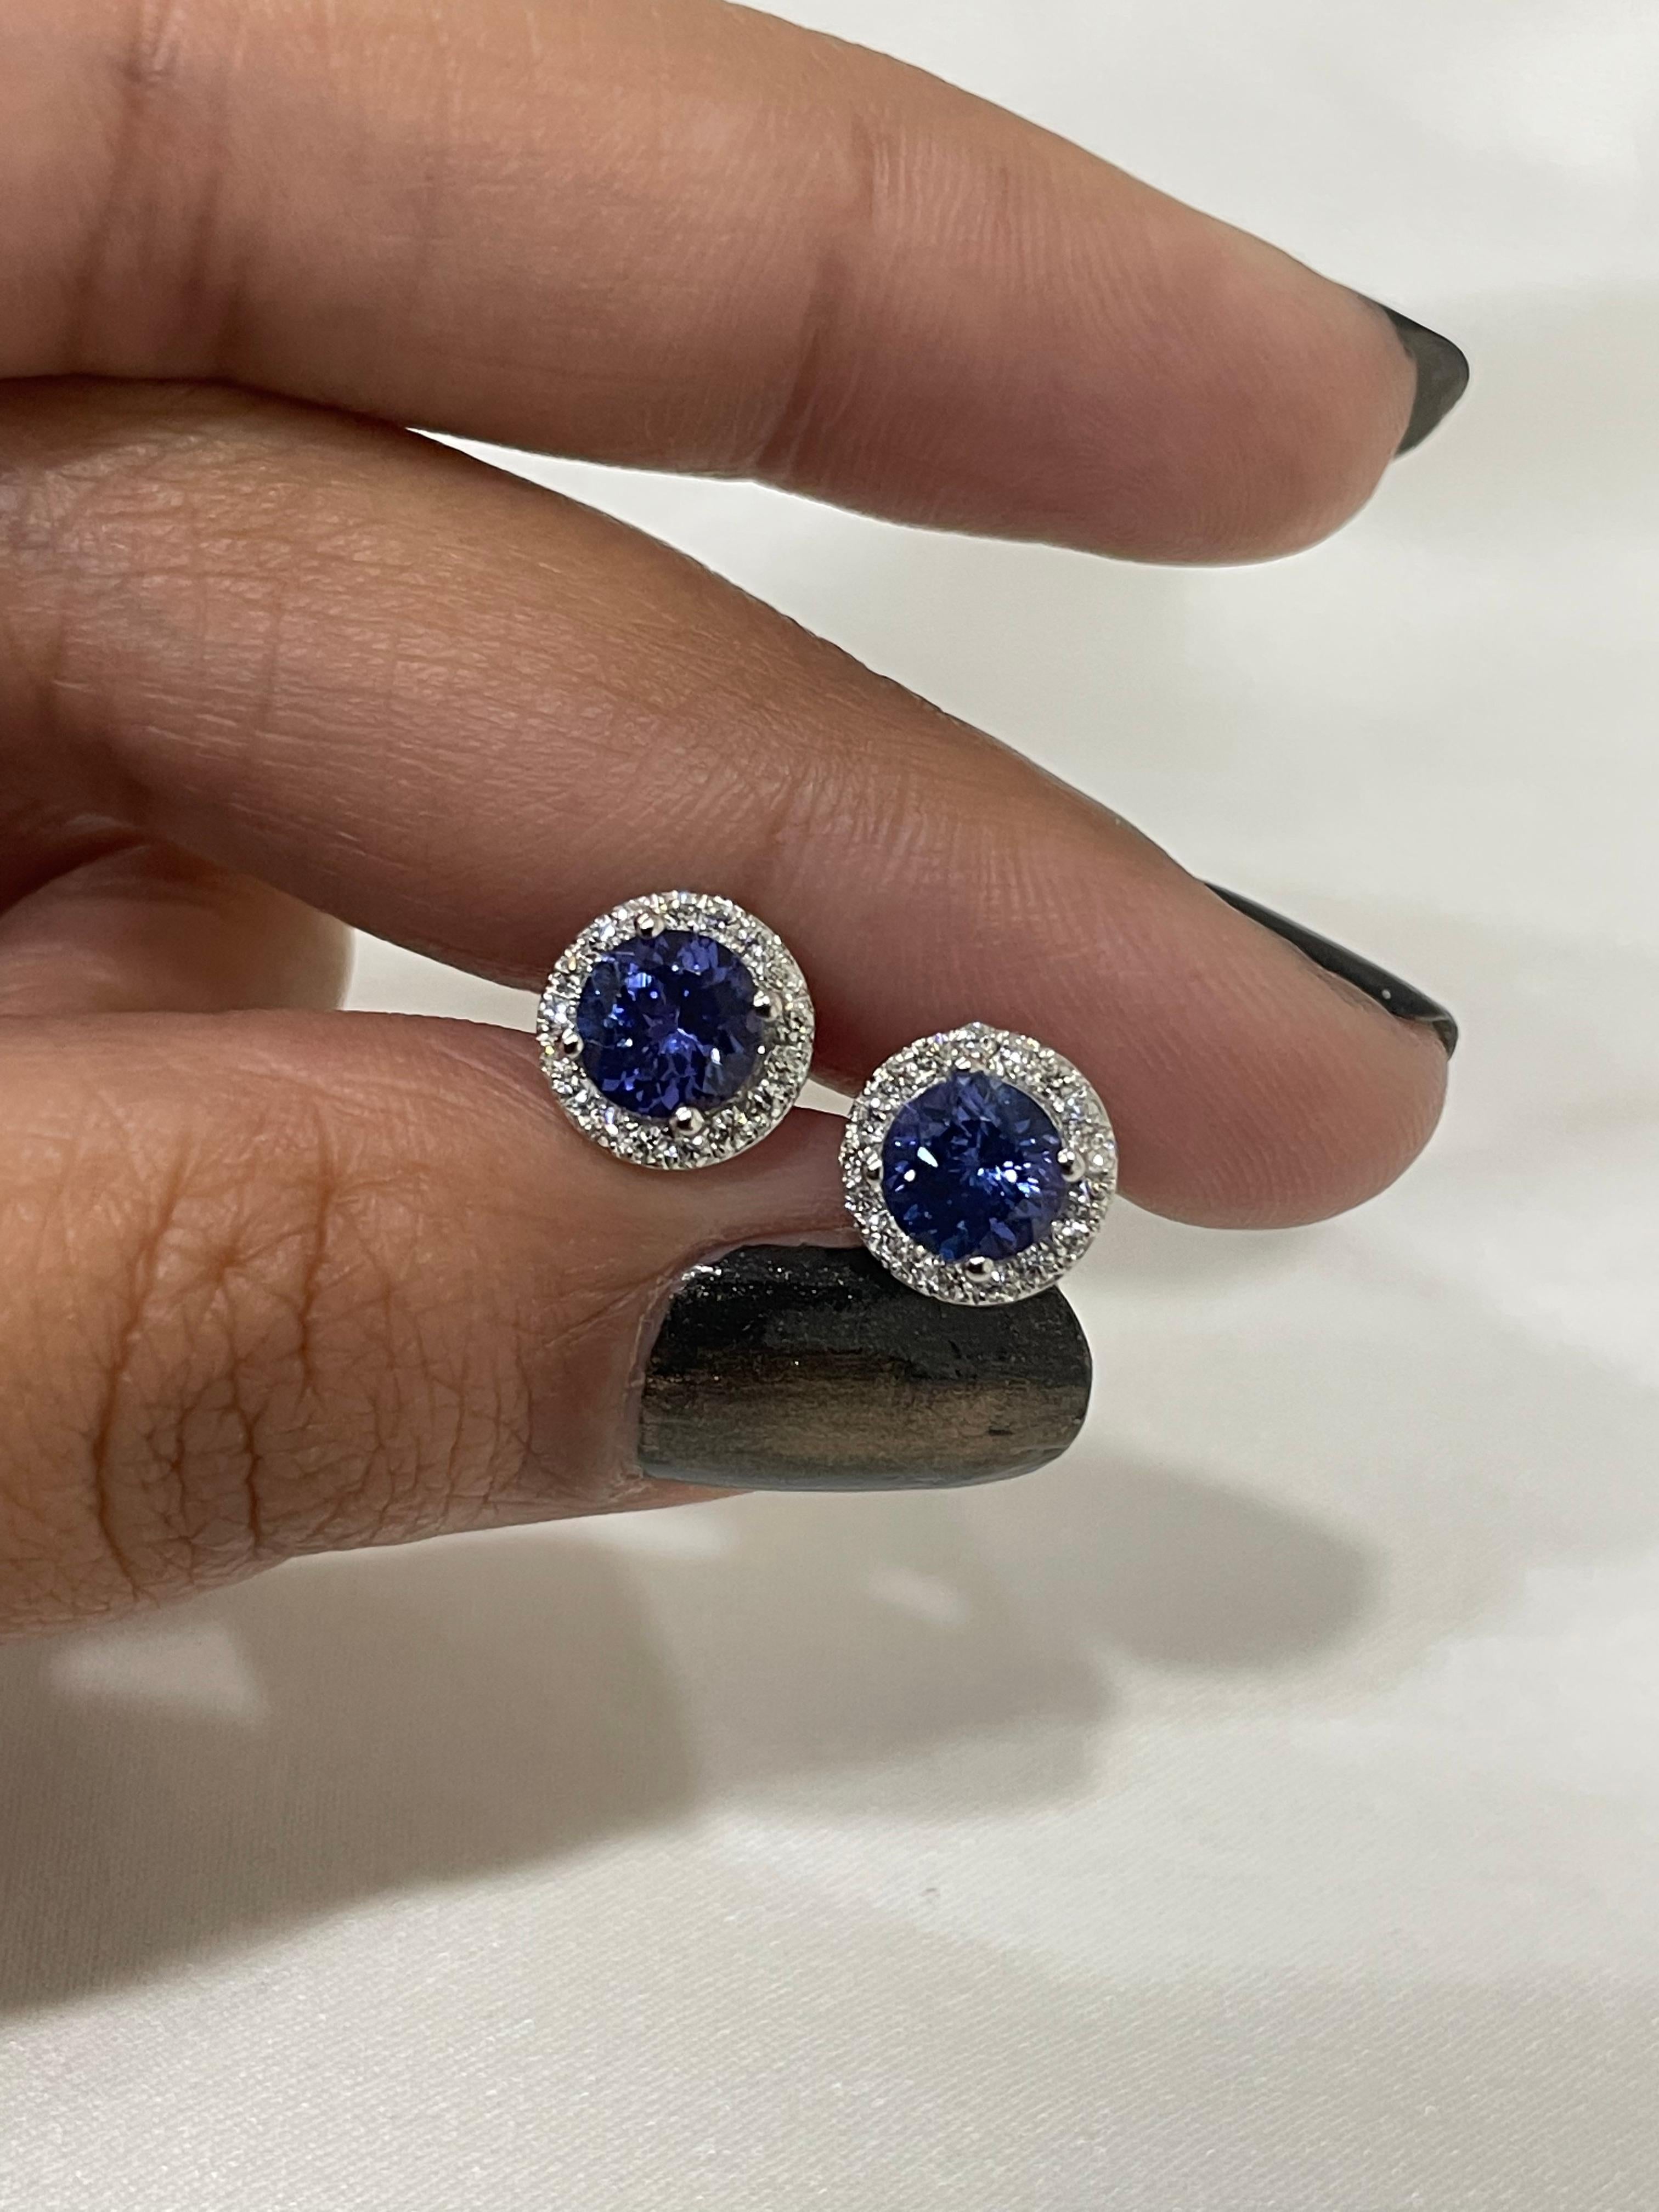 Studs create a subtle beauty while showcasing the colors of the natural precious gemstones and illuminating diamonds making a statement.

Round cut tanzanite studs with diamonds in 18K gold. Embrace your look with these stunning pair of earrings